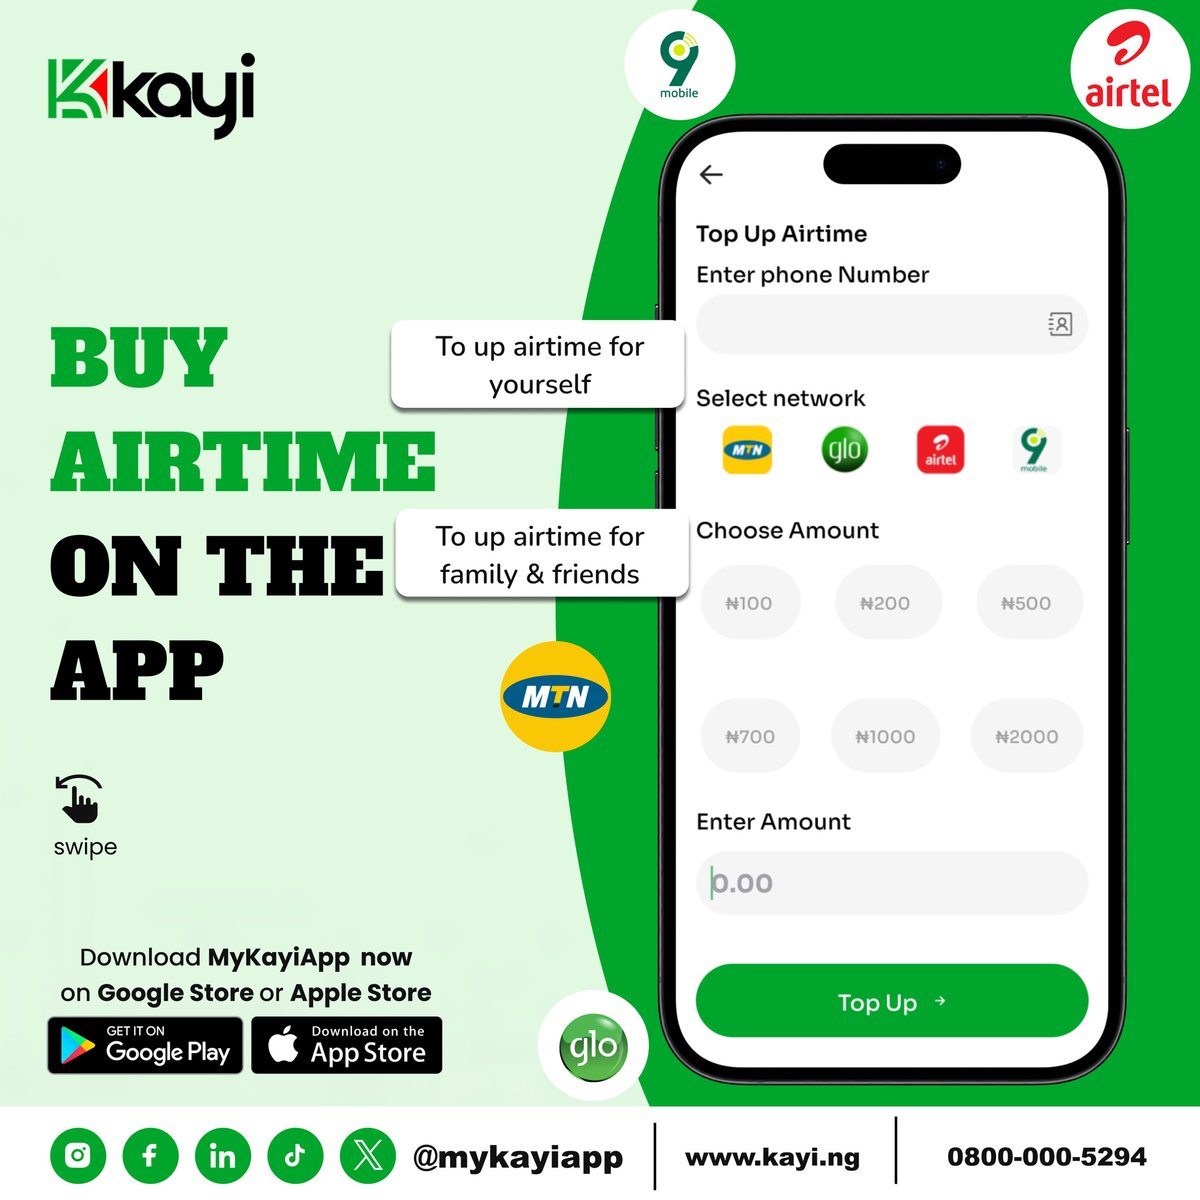 Stay connected effortlessly with Kayiapp's instant airtime top-up feature! Whether it's for a quick chat or catching up with loved ones, top up your airtime in seconds. Convenience at your fingertips!

#AirtimeTopUp
#Mykayiapp
#Kayiway
#Digitalbanking